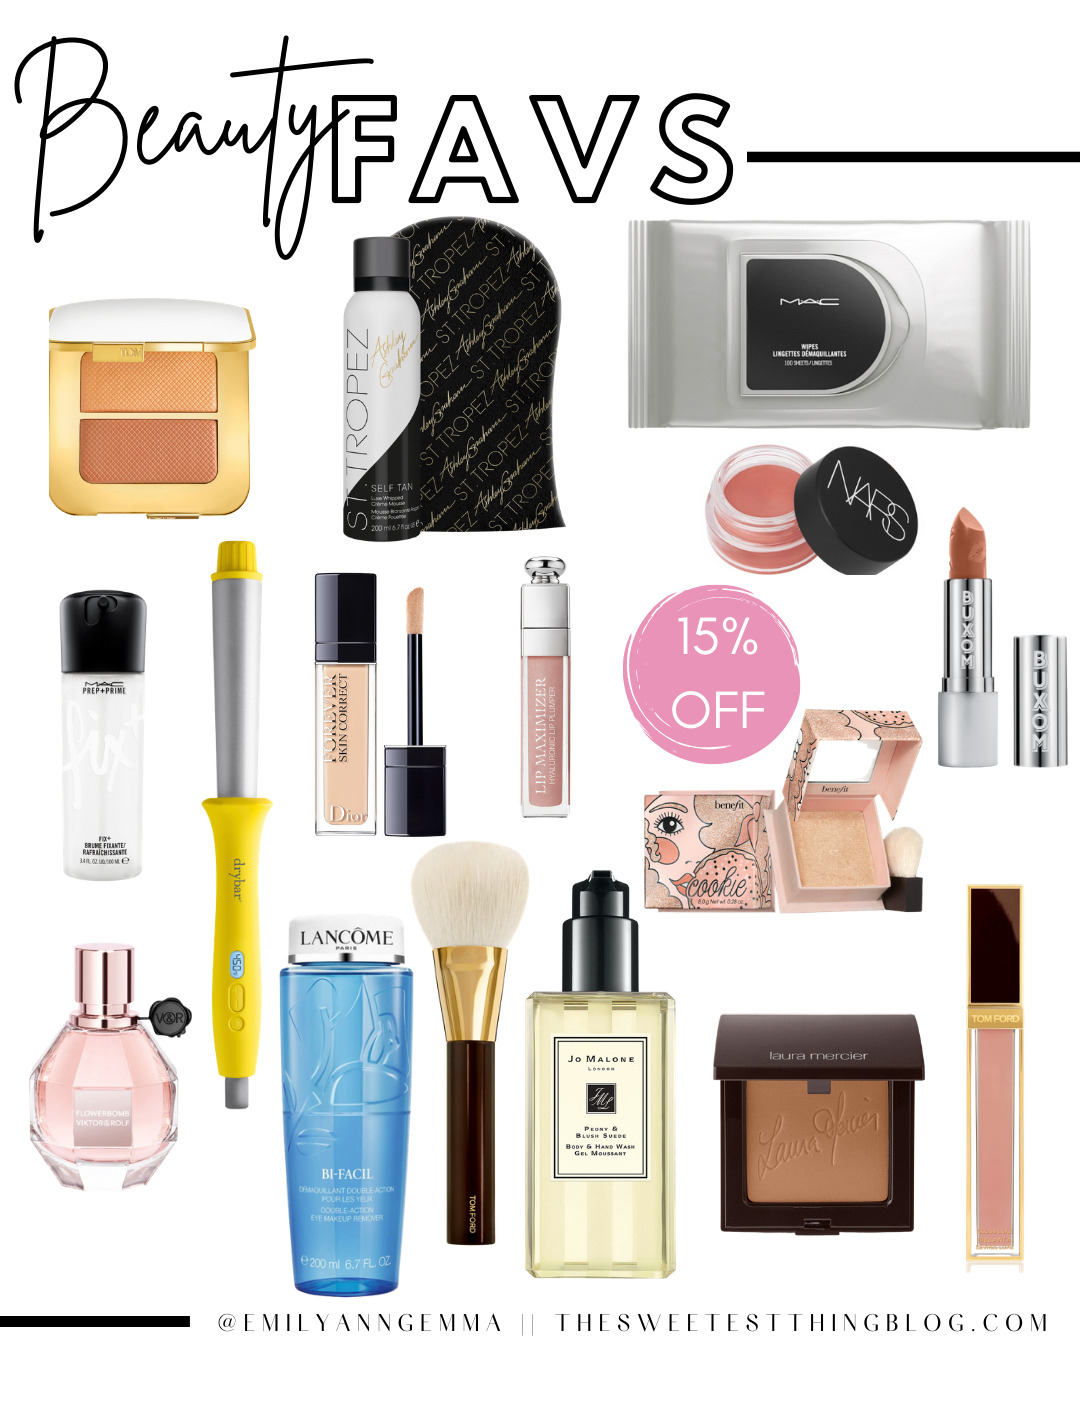 Emily ann gemma beauty and makeup favorites on sale at Nordstrom